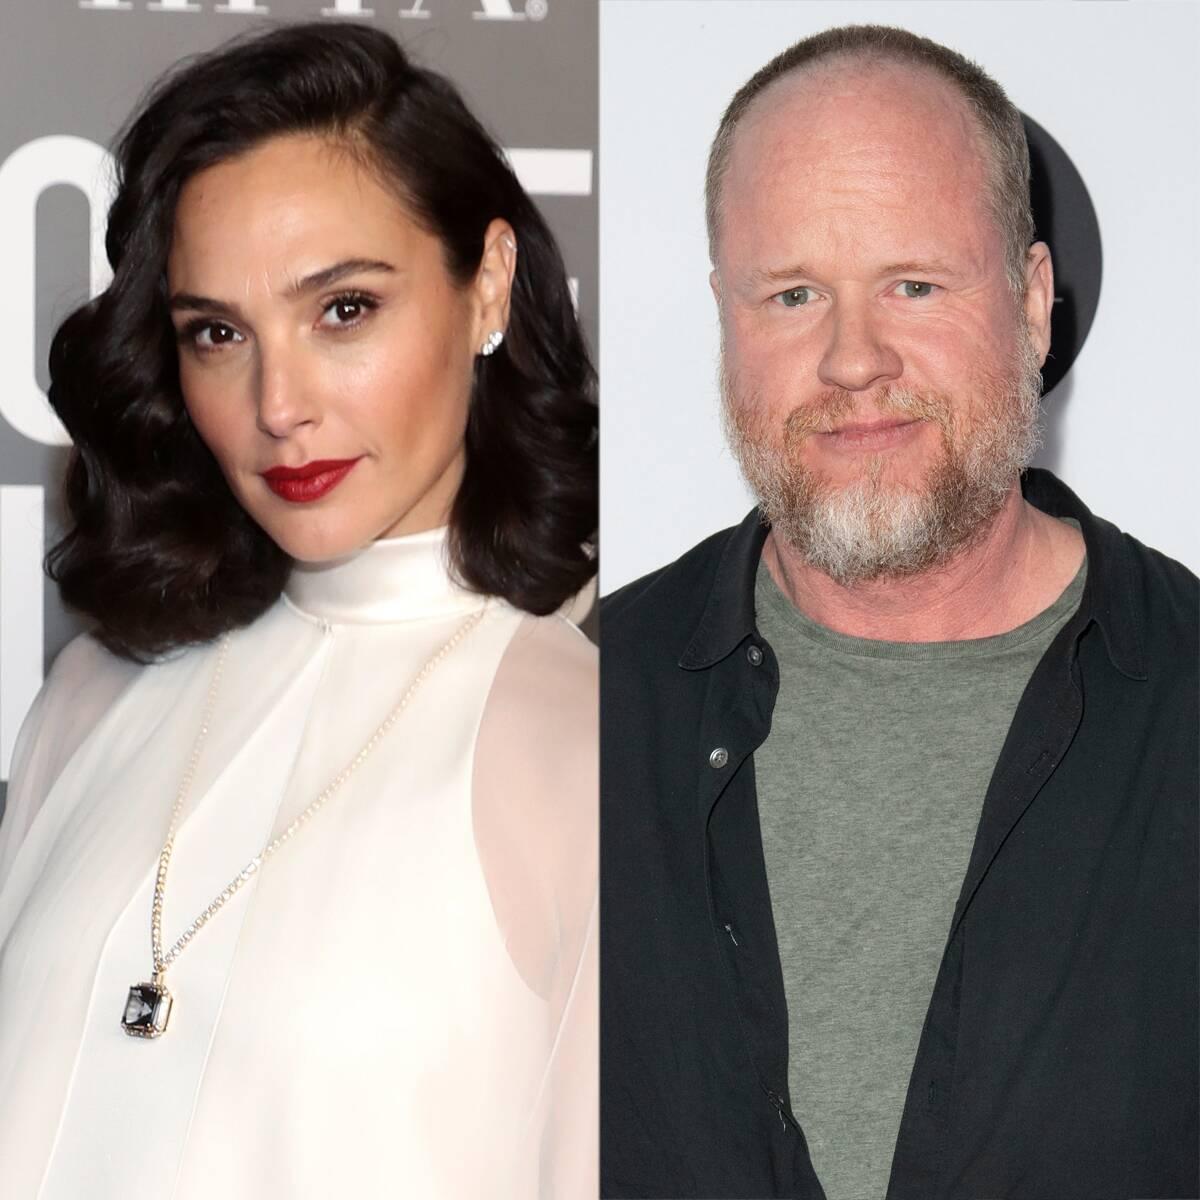  Yahoo Movies Gal Gadot says Joss Whedon ‘threatened’ her career during ‘Justice League’ reshoots